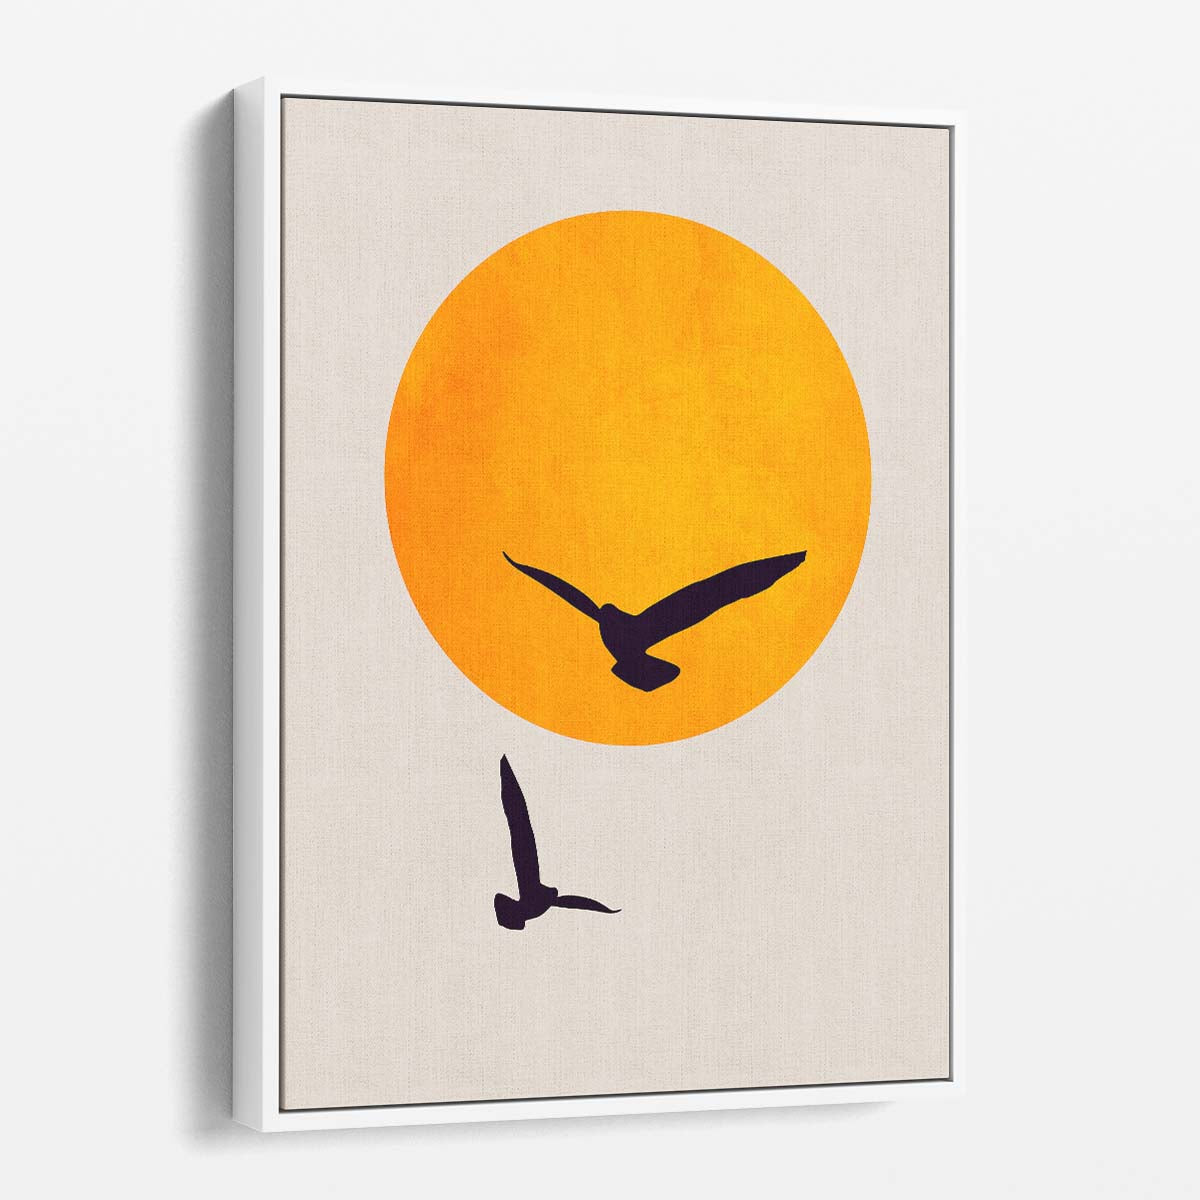 Bright Animal Illustration Kubistika's Birds in Sky on White by Luxuriance Designs, made in USA